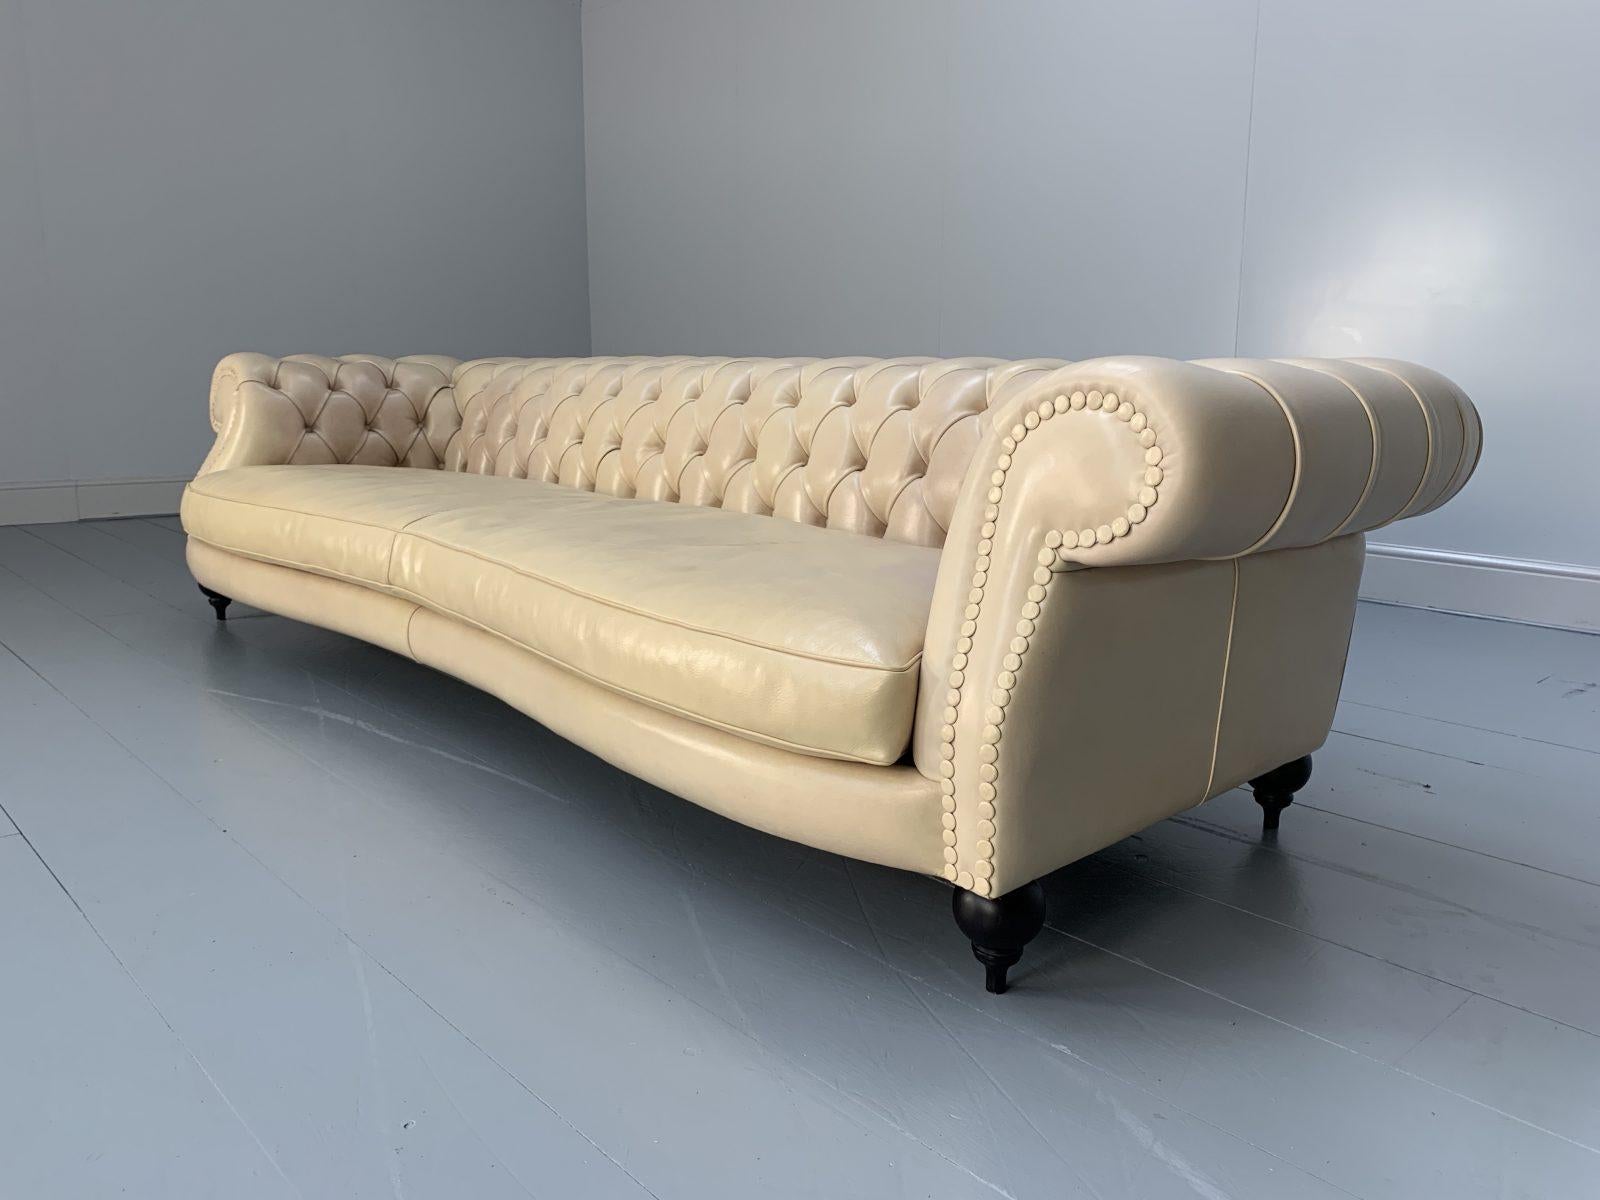 This is a spectacular, rare “Diana Chester” 4-seat sofa from the world renown Italian furniture house of Baxter, dressed in a sublime cream “Tuscany” leather, and with walnut feet

In a world of temporary pleasures, Baxter create beautiful